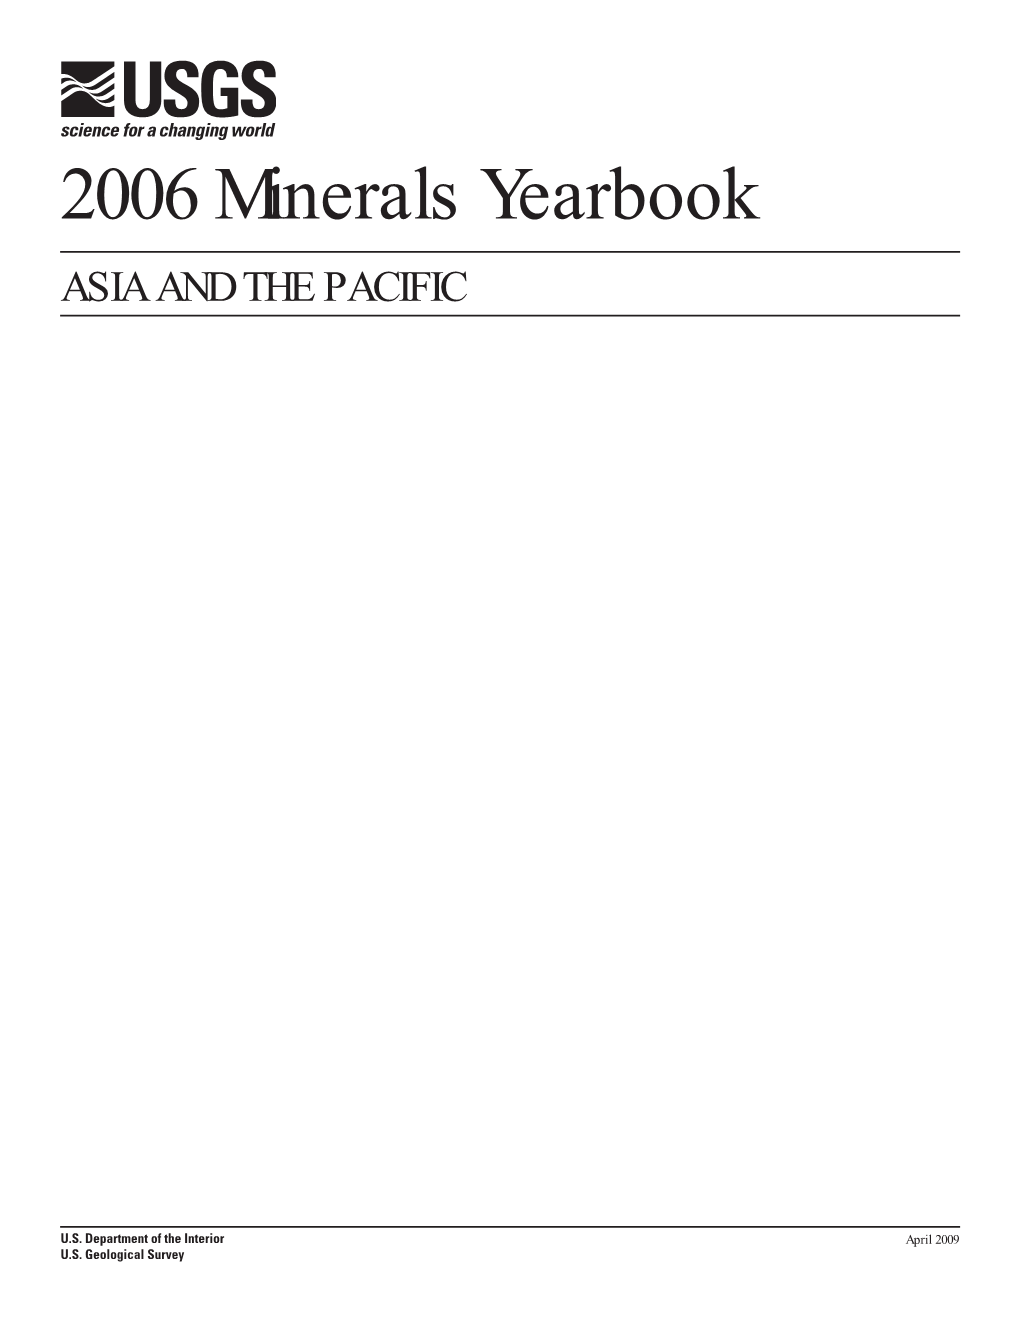 The Mineral Industries of Asia and the Pacific in 2006